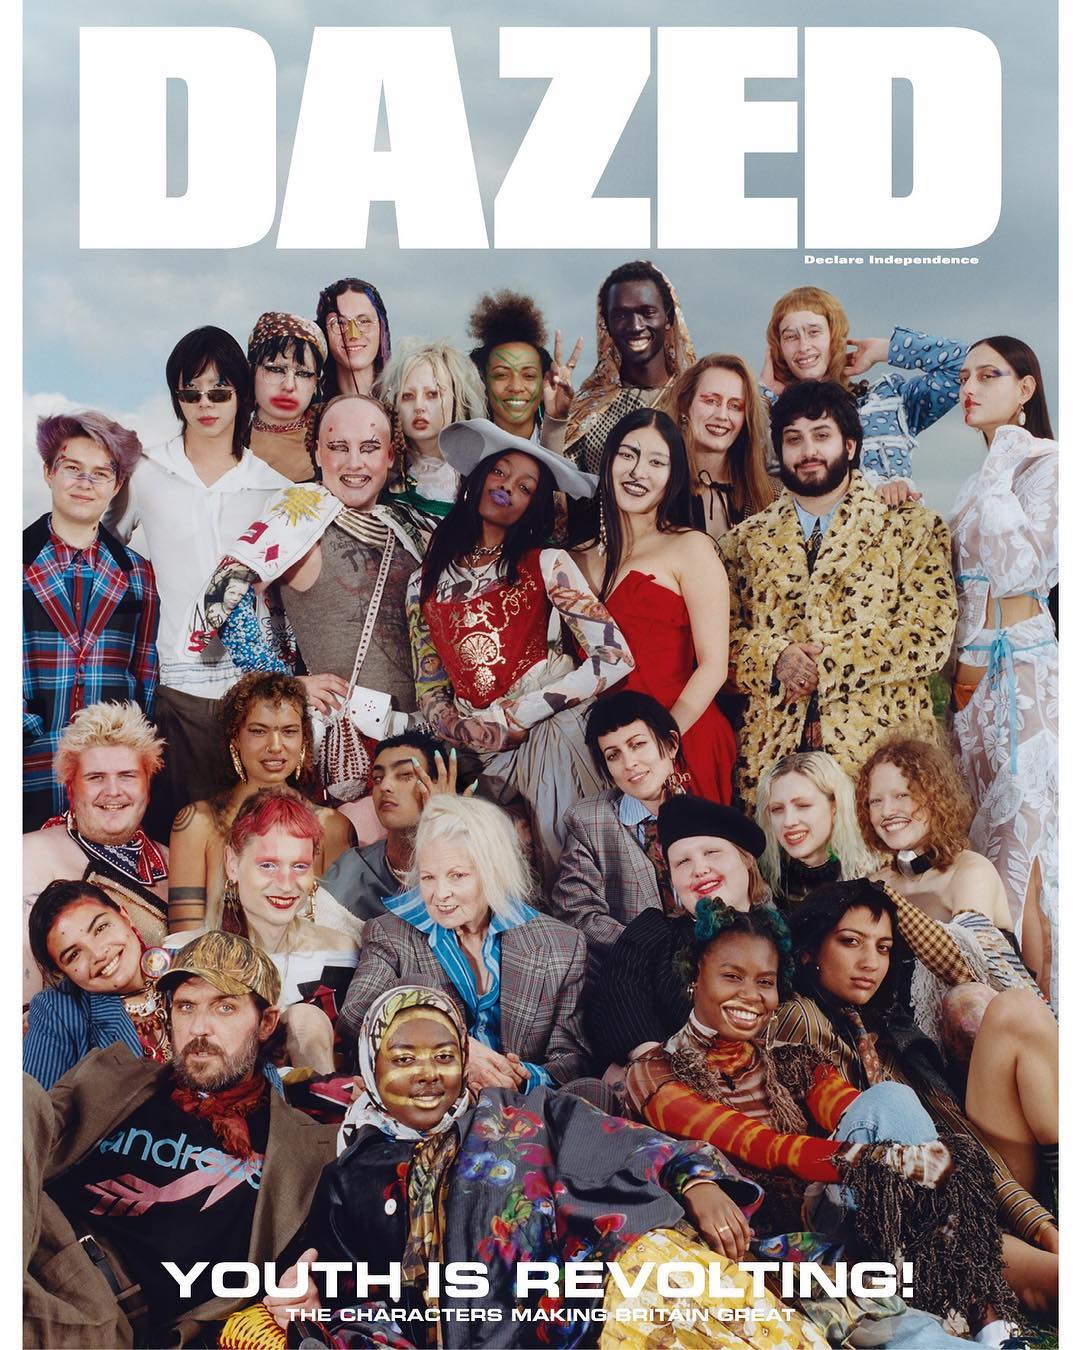 Zaina, featured on the cover of Dazed magazine